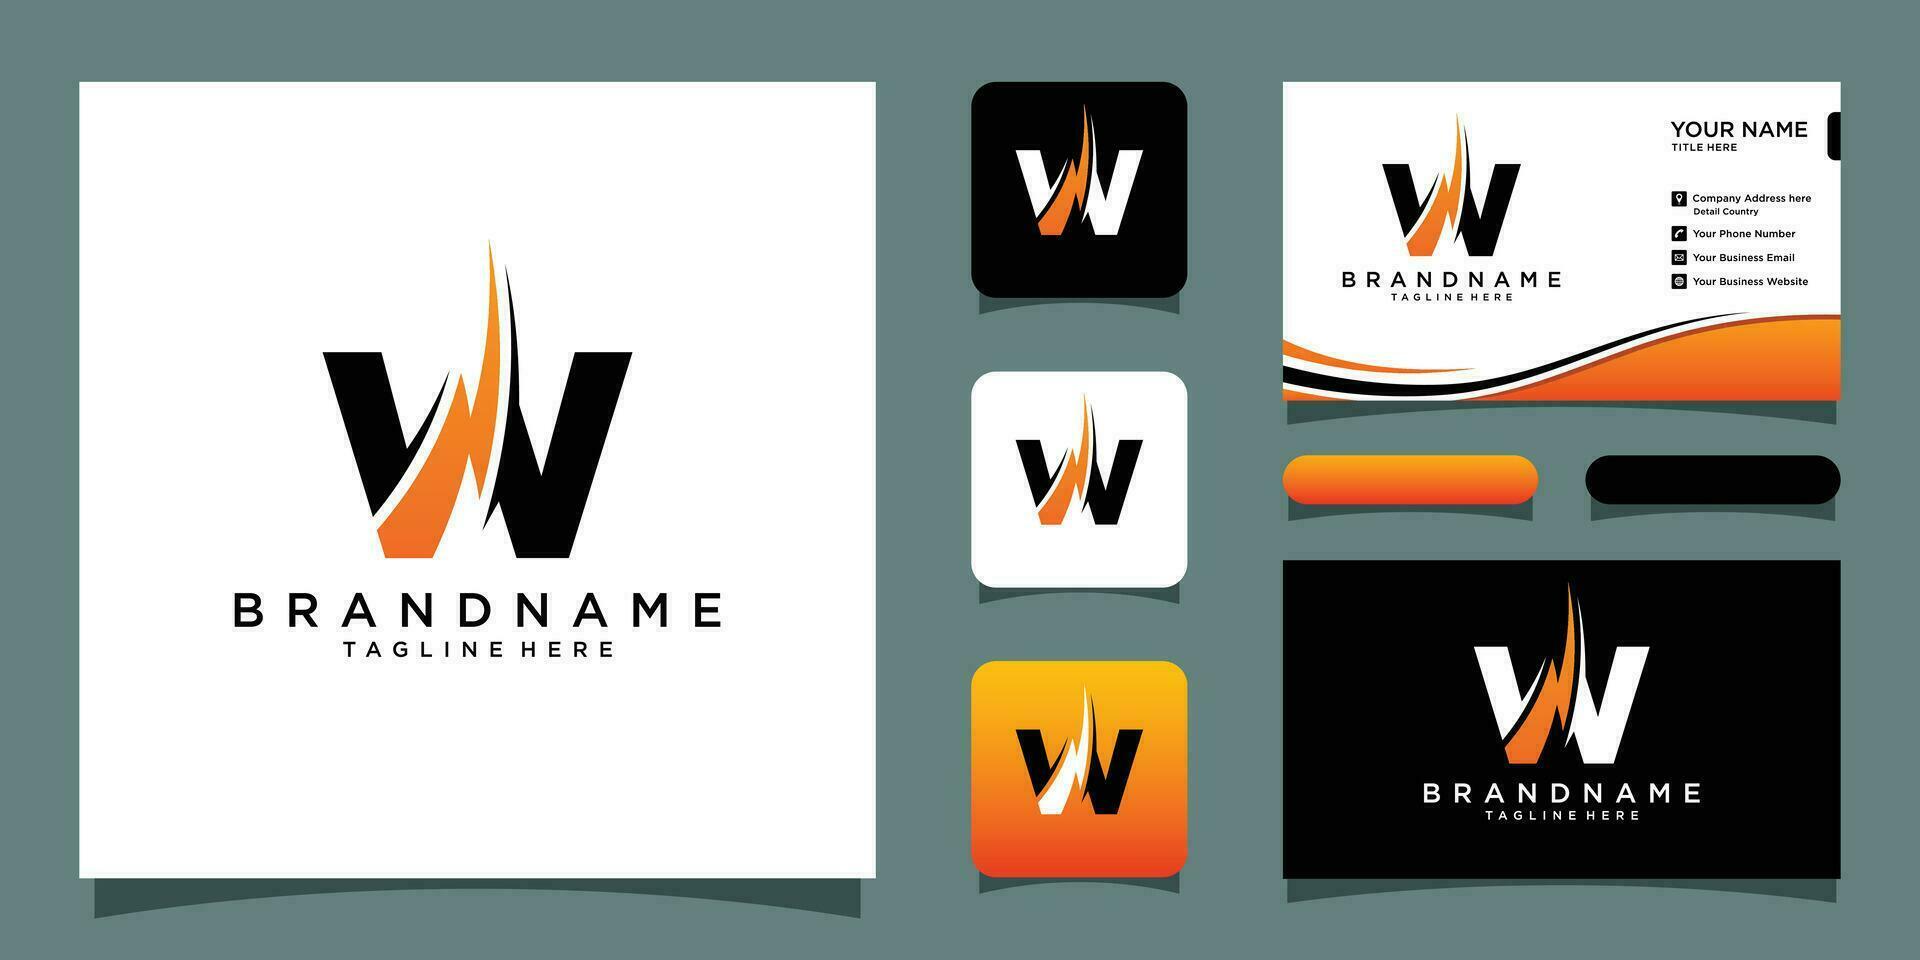 Flash W letter logo, electrical bolt logo vector with business card design Premium Vector